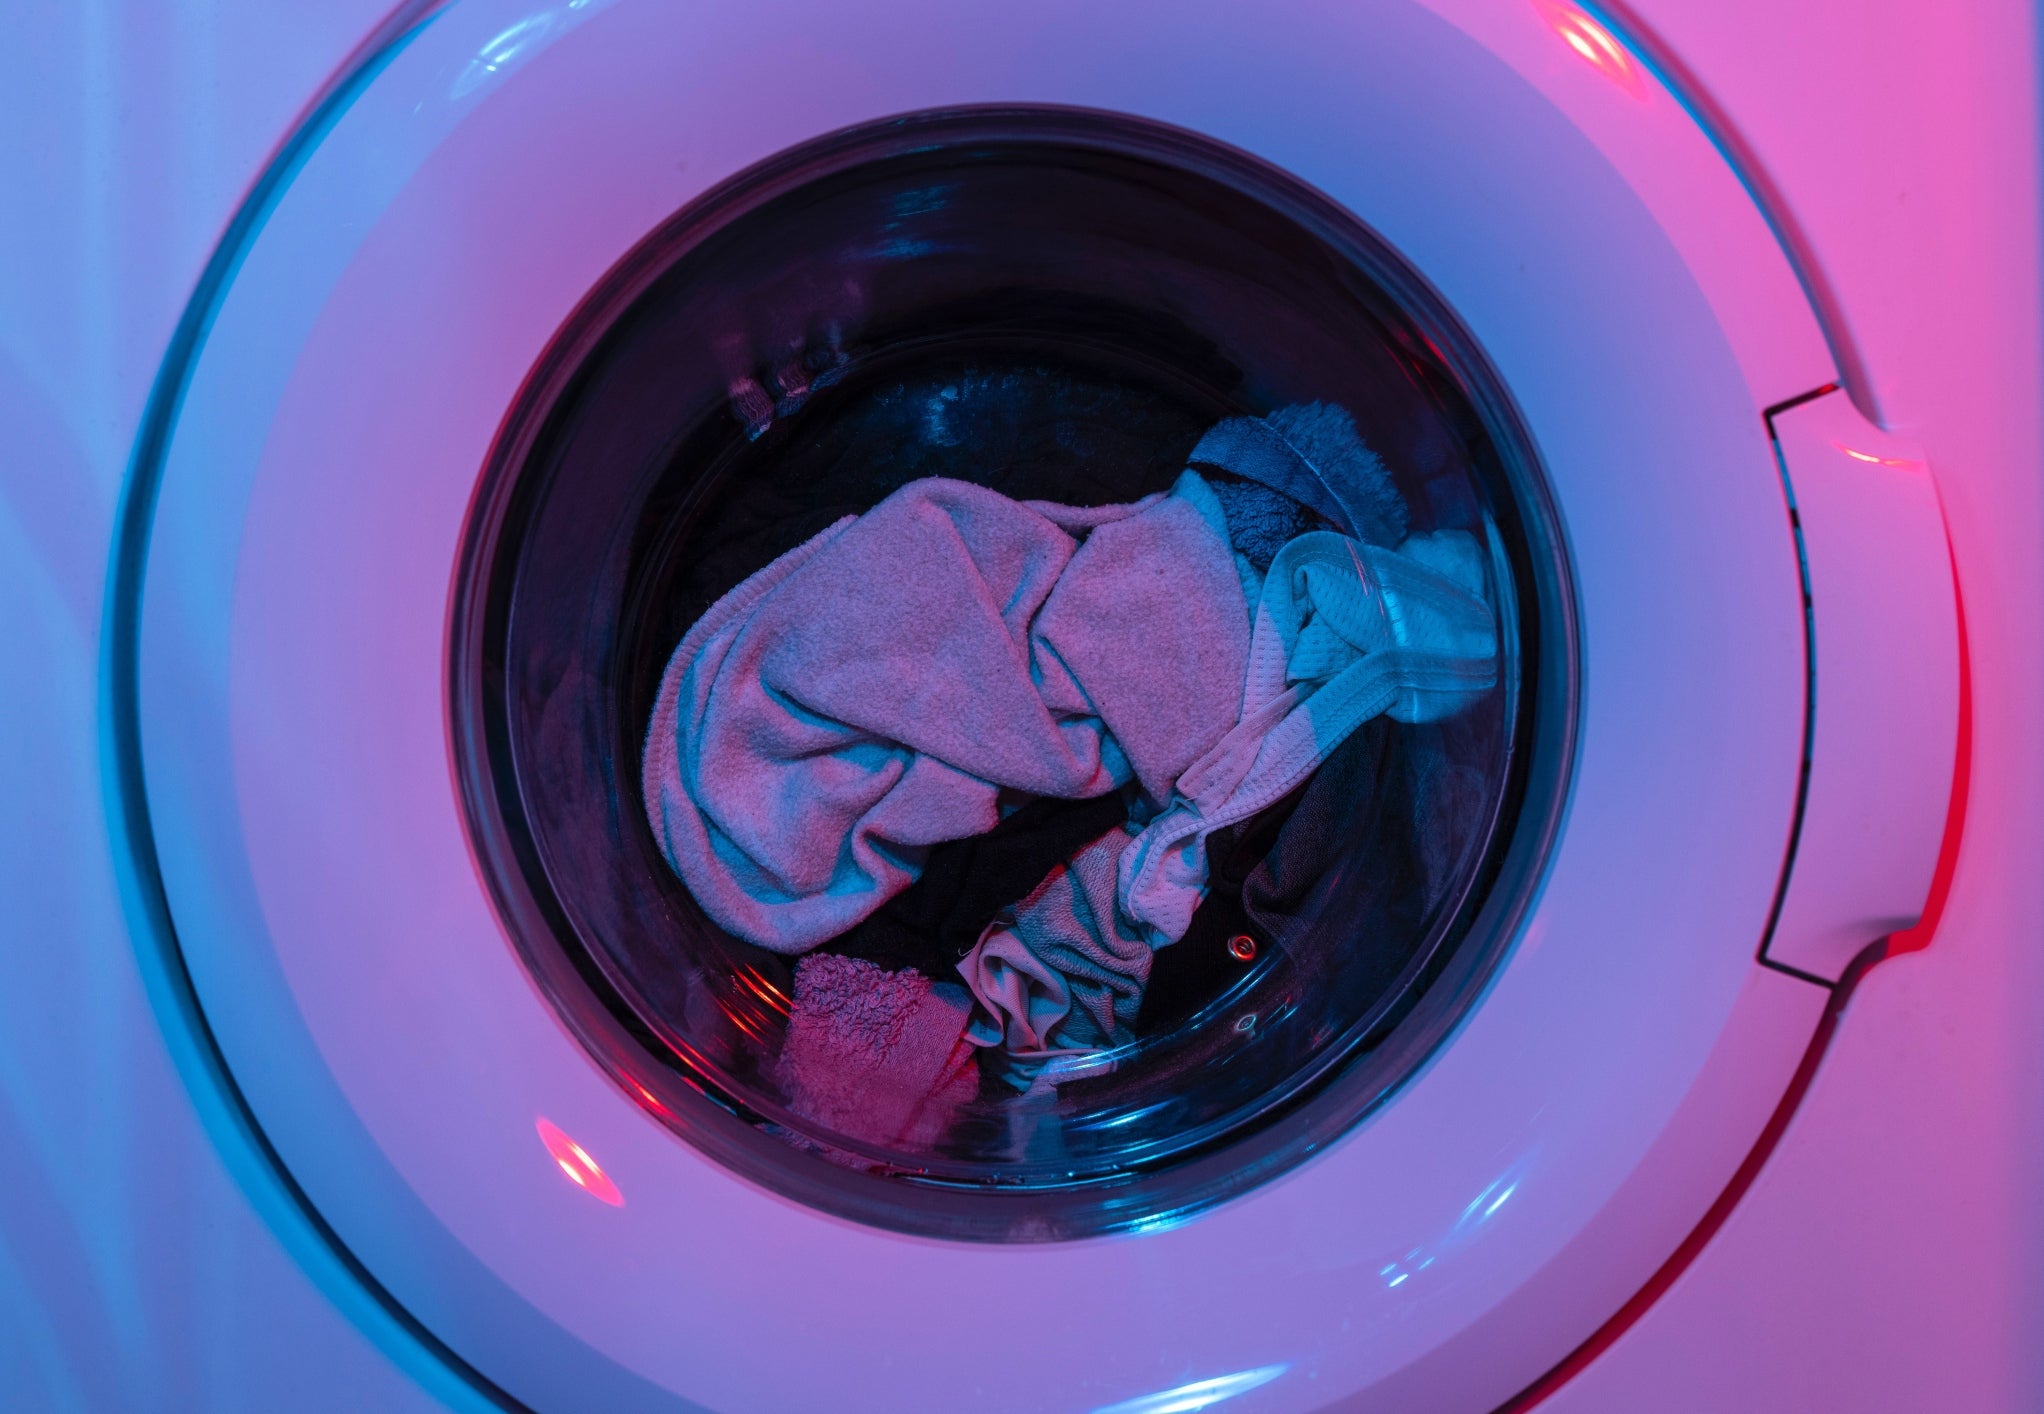 How to dry laundry outside quickly and prevent clothes 'smelling